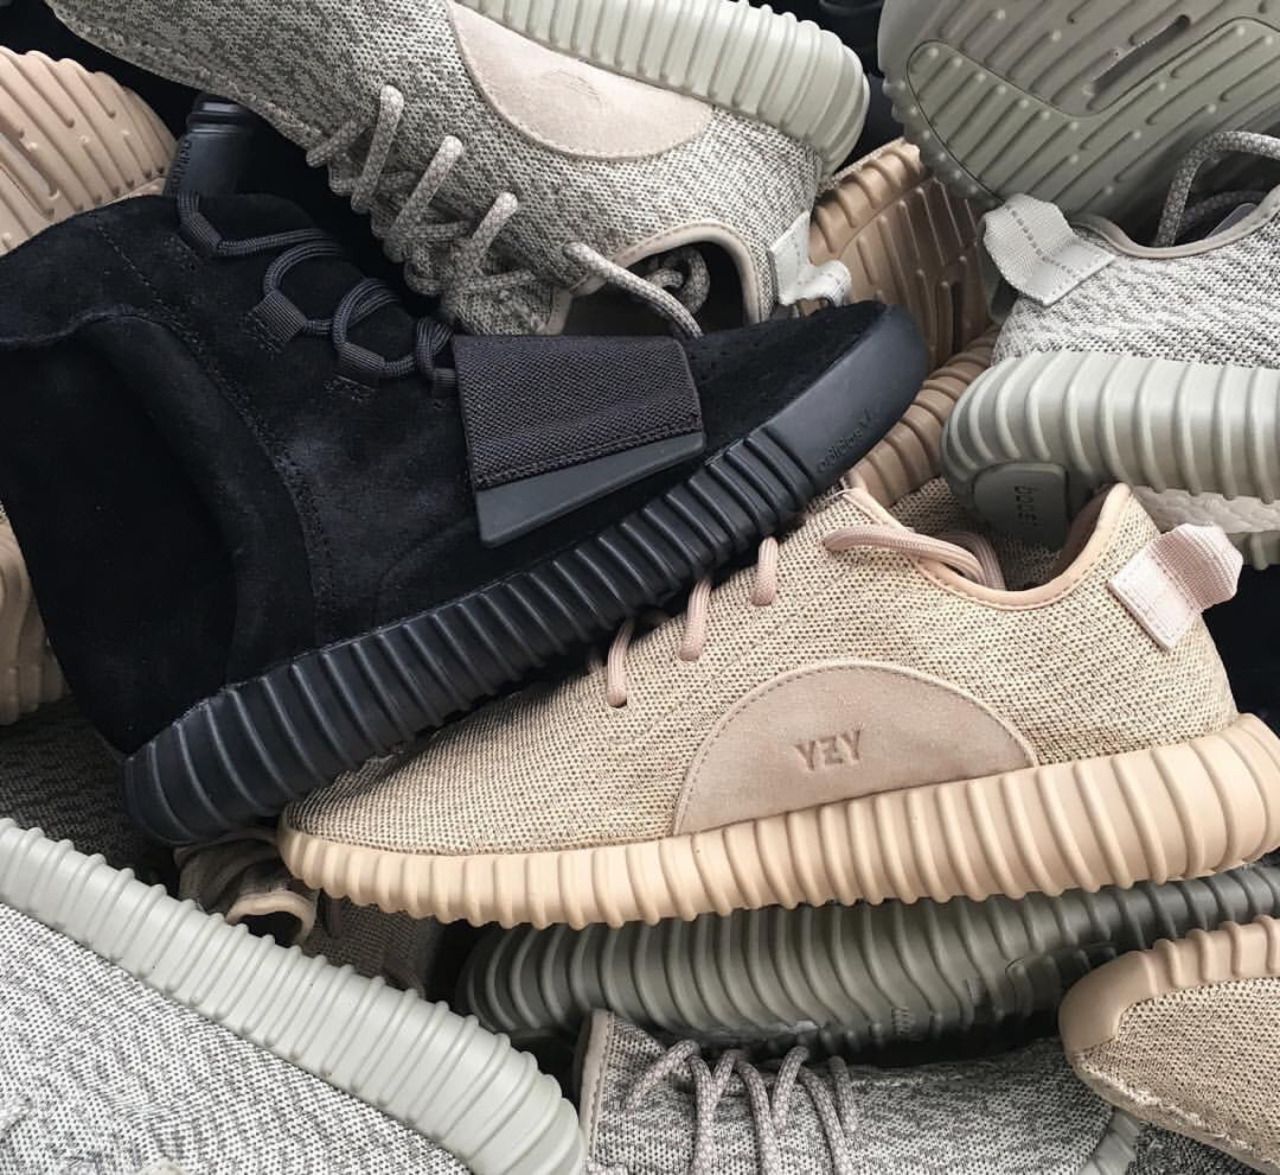 Sell Your Adidas Yeezy Boost: 9 Awesome 